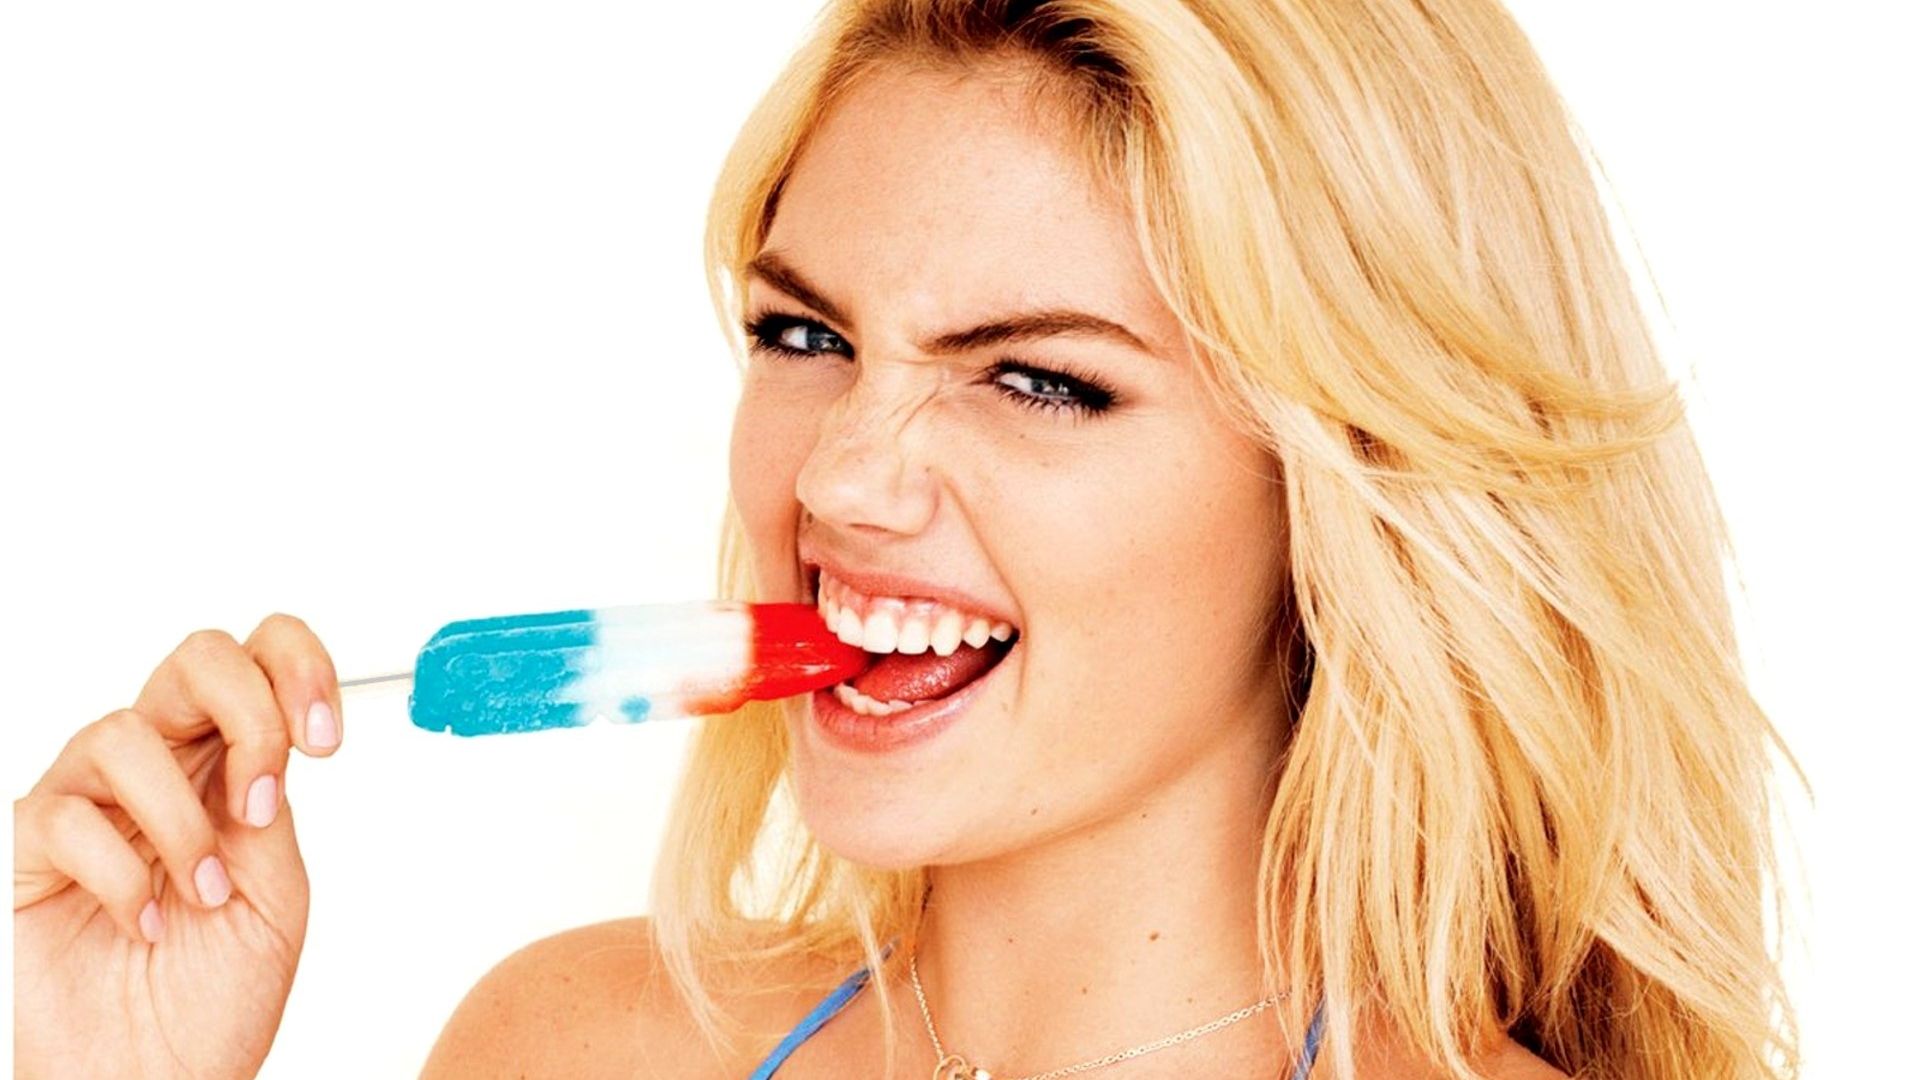 Wallpaper Kate Upton and candy